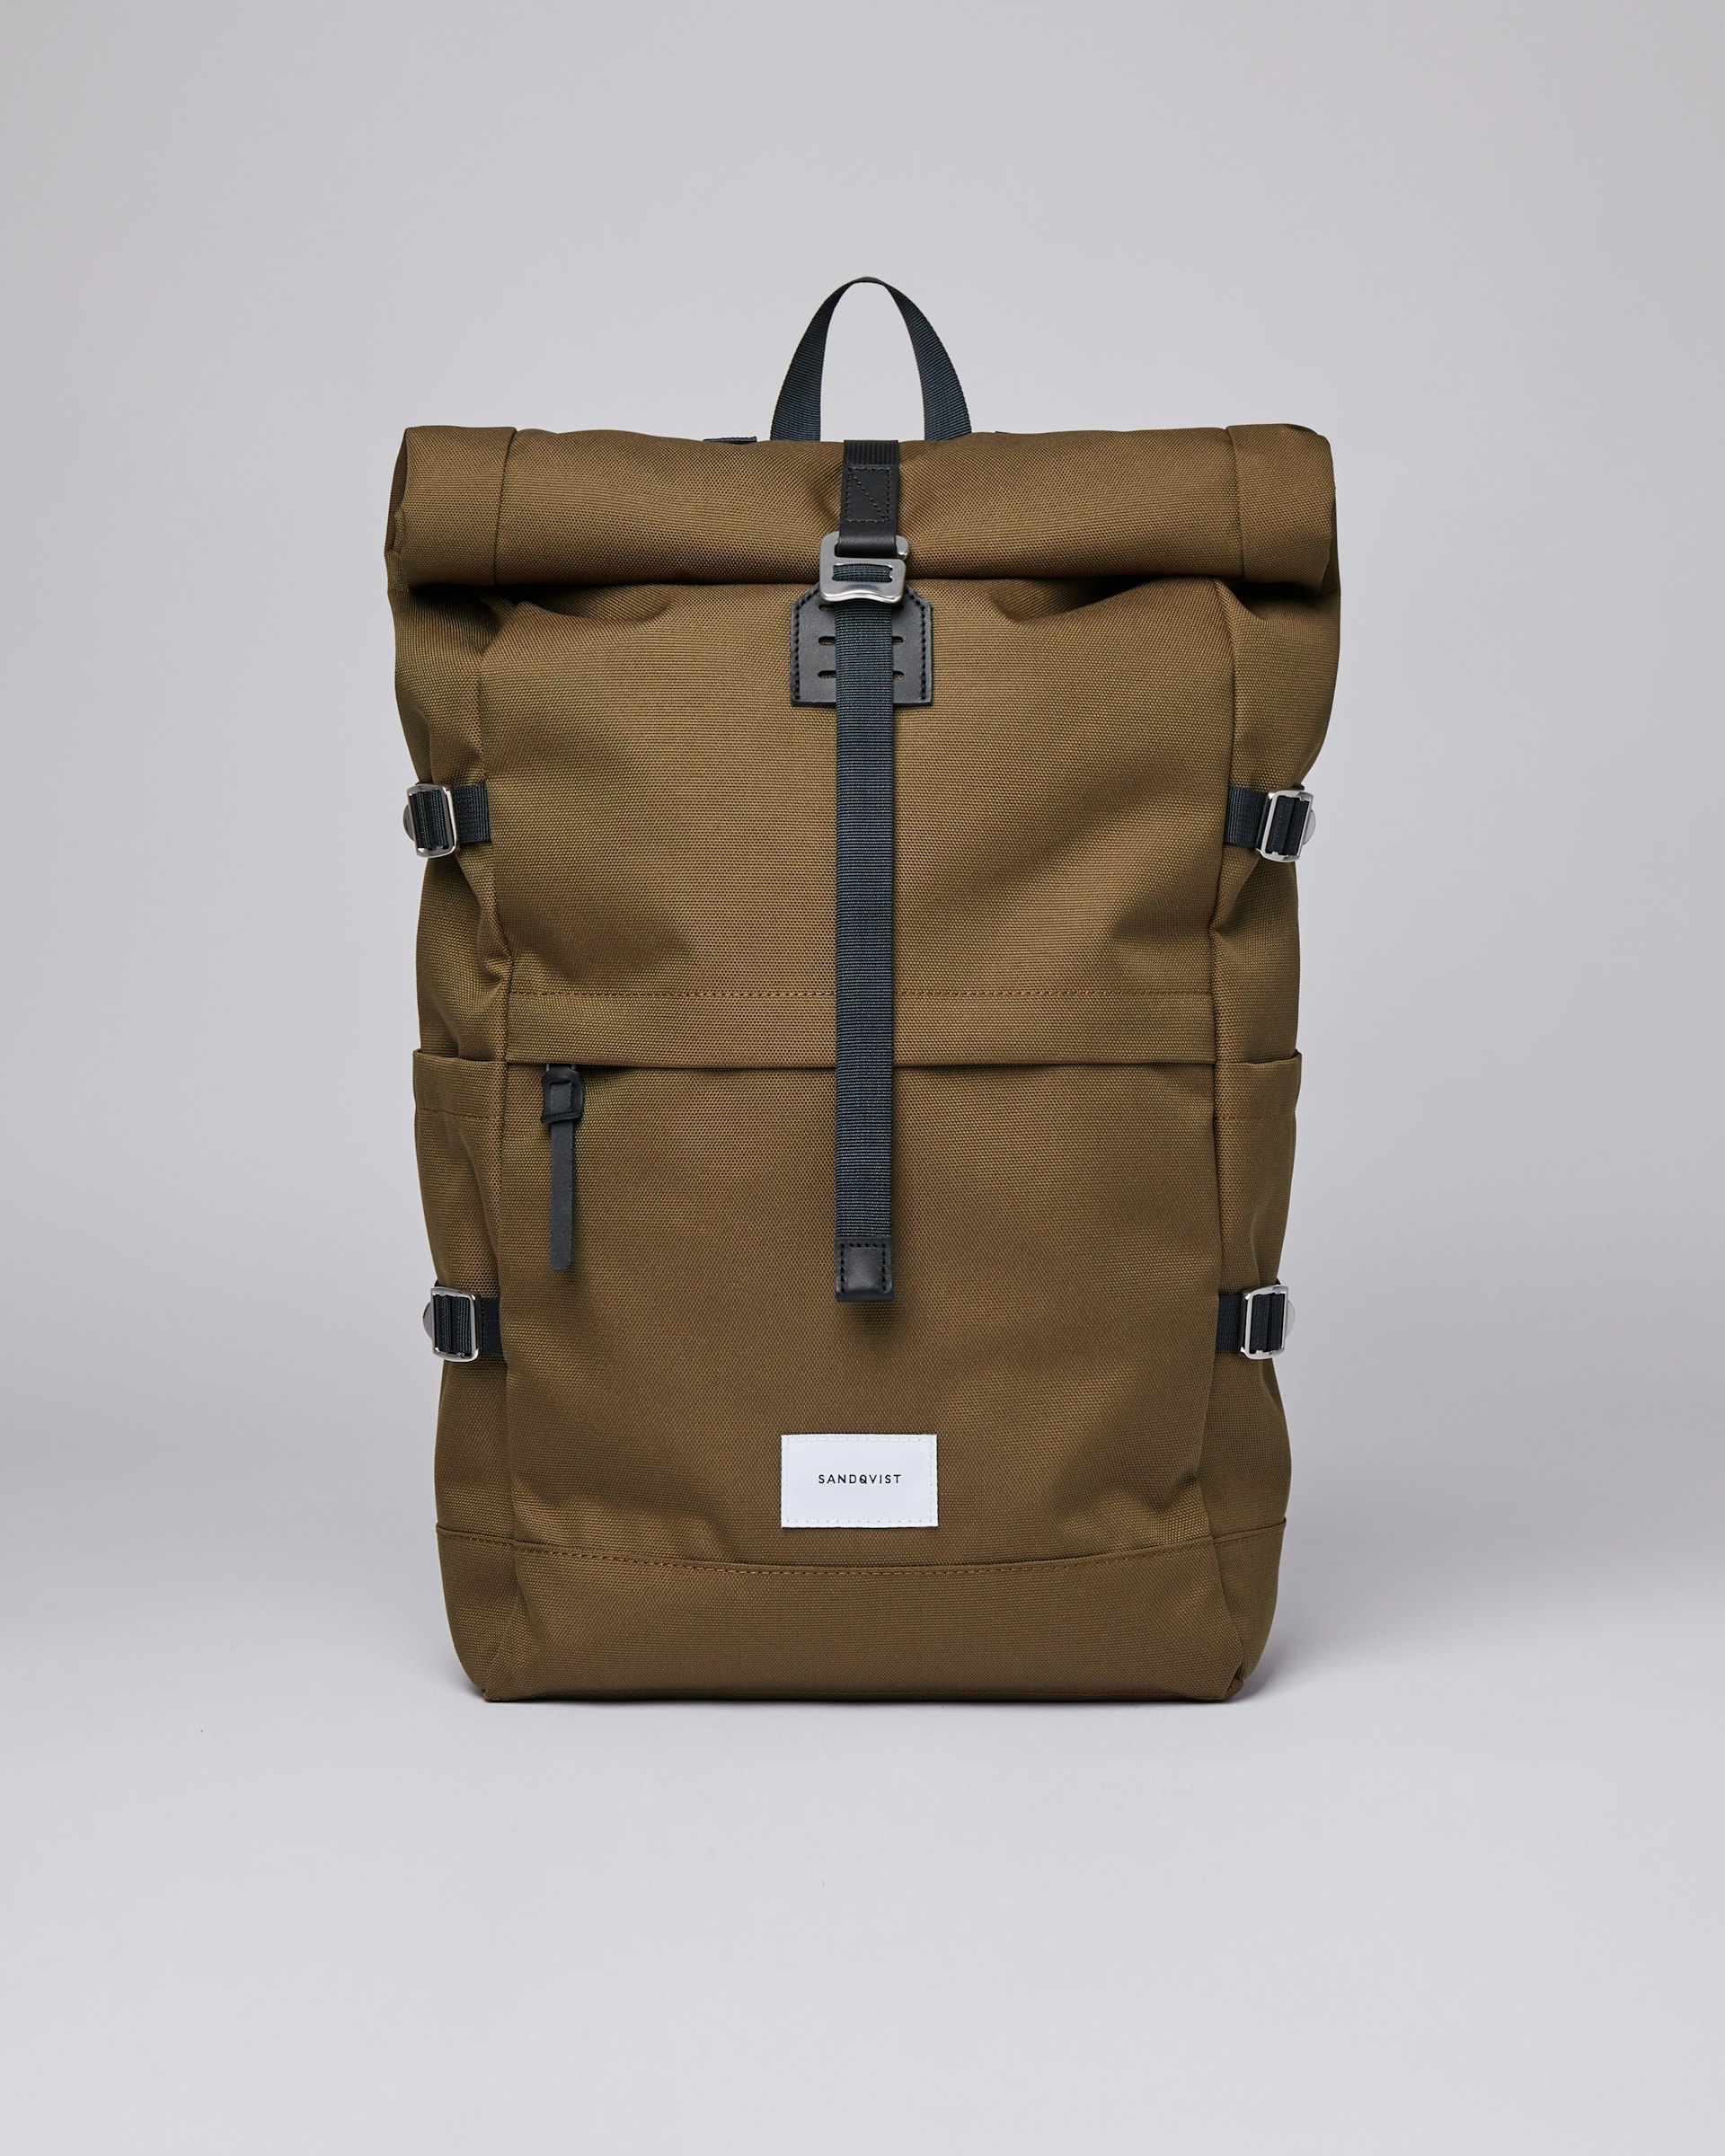 Bernt belongs to the category Backpacks and is in color olive (1 of 7)